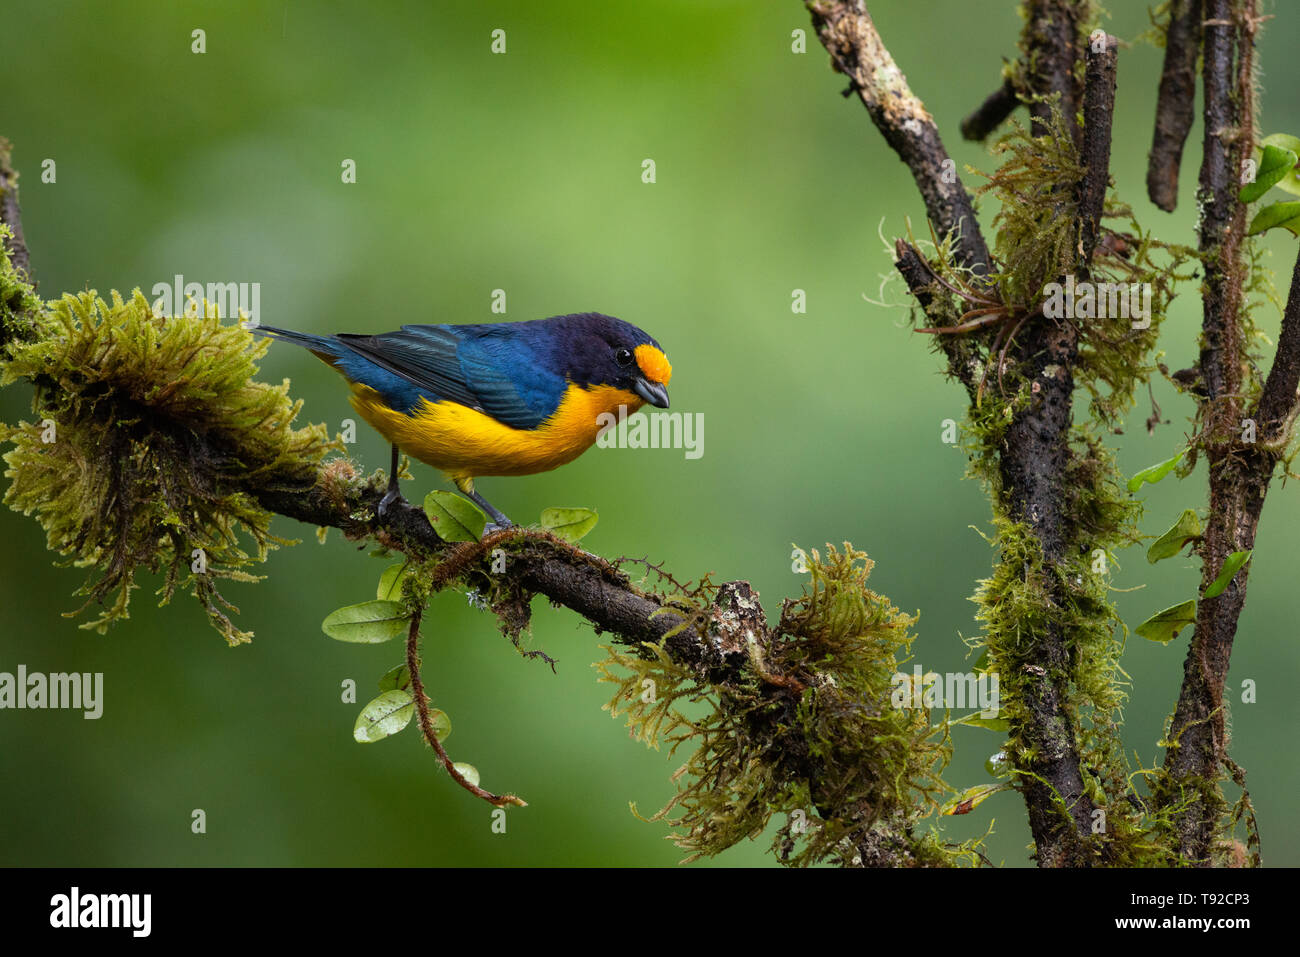 A male Violaceous Euphonia (Euphonia violacea) from the Atlantic Rainforest of SE Brazil Stock Photo